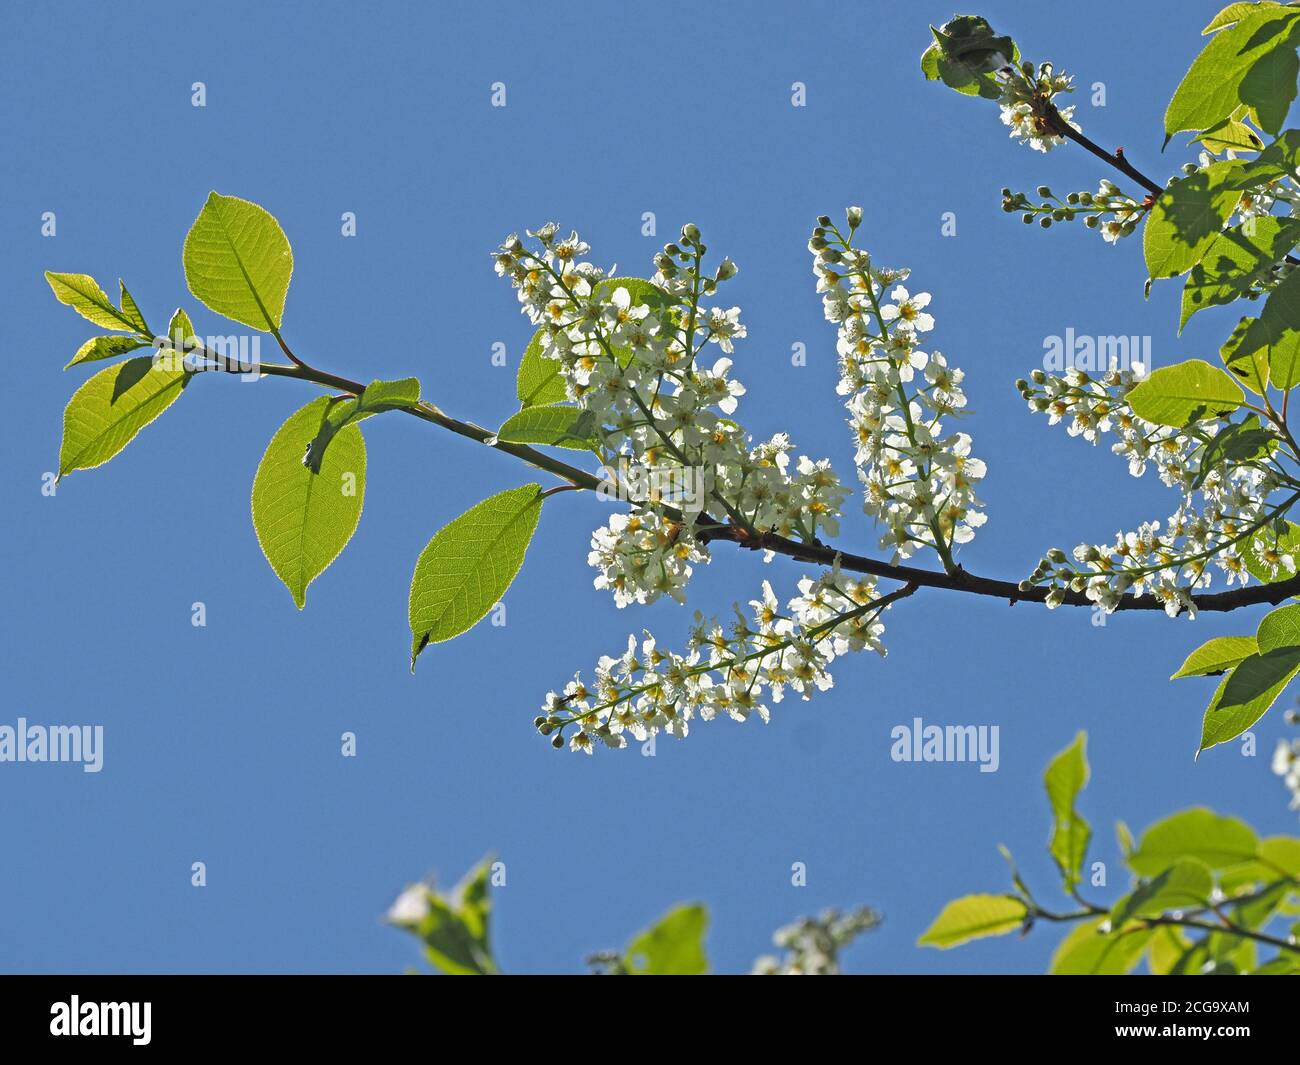 green leaves & panicles of white, scented blossom of European Bird Cherry (Prunus padus) backlit against clear blue Spring sky in Cumbria, England, UK Stock Photo